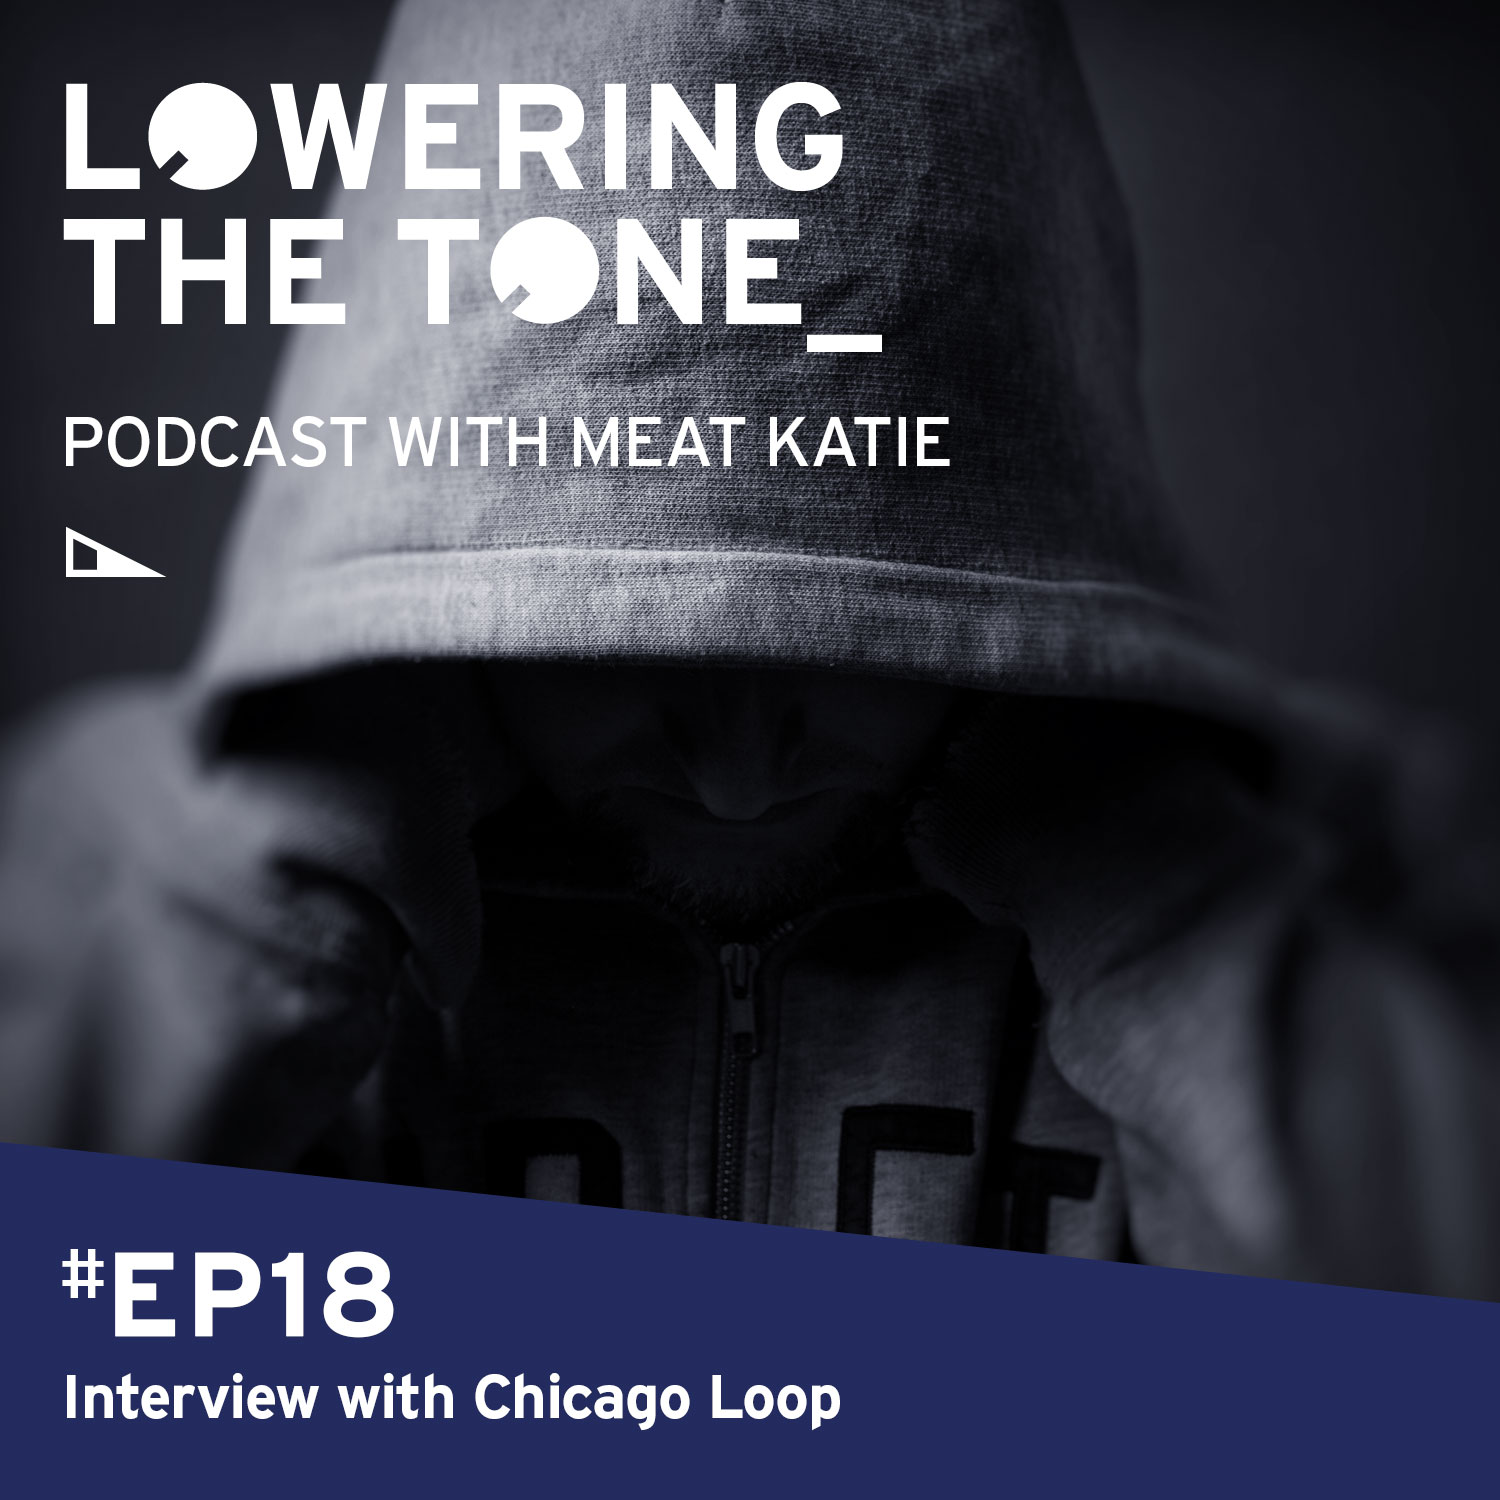 Meat Katie 'Lowering The Tone' Episode 18 - (Interview with Chicago Loop)